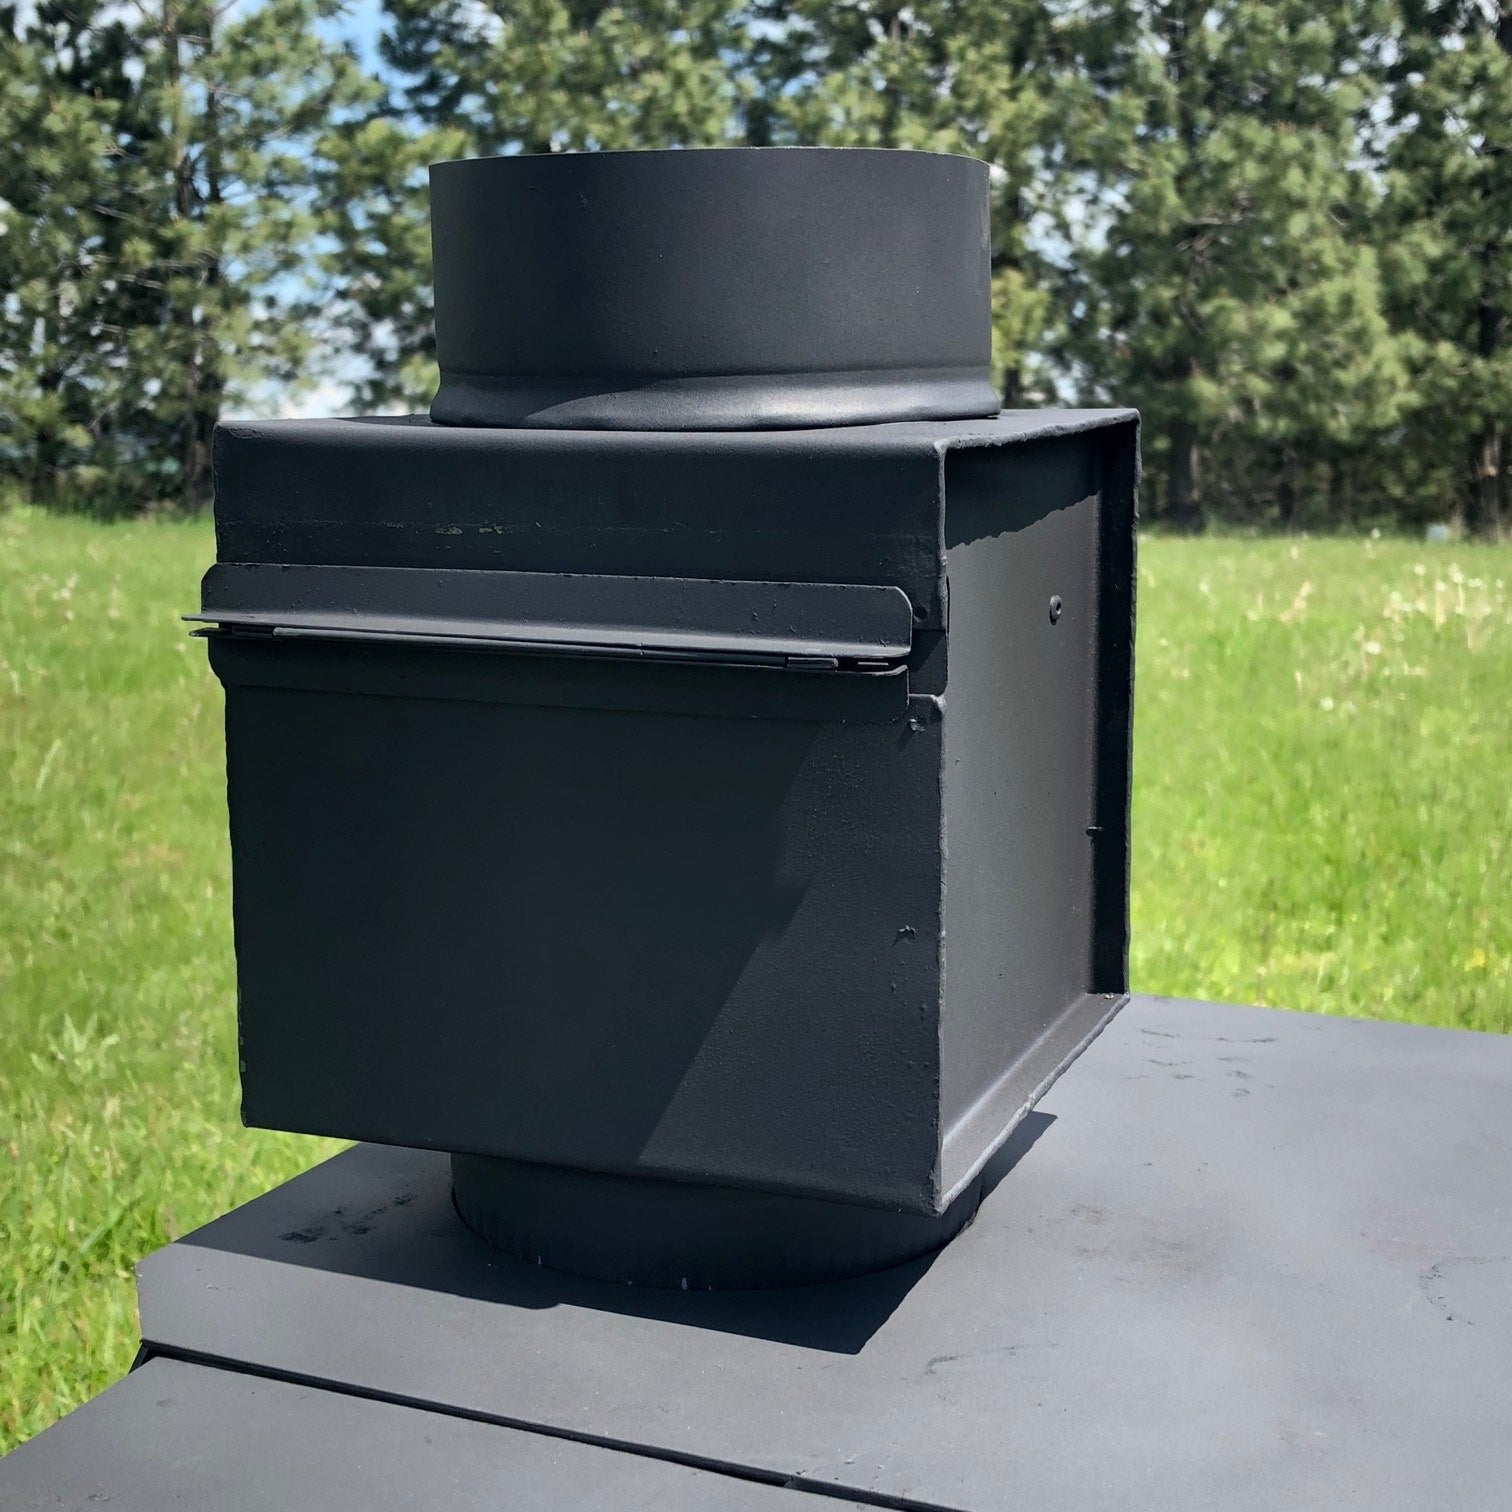 5" In-Iine spark arrestor, stack robber, heat exchanger, black sheet metal box used in canvas tent camping to catch sparks as they exit the wood stove pipe.  Useful with canvas tents, wall tents, hunting tents, and glamping tents.